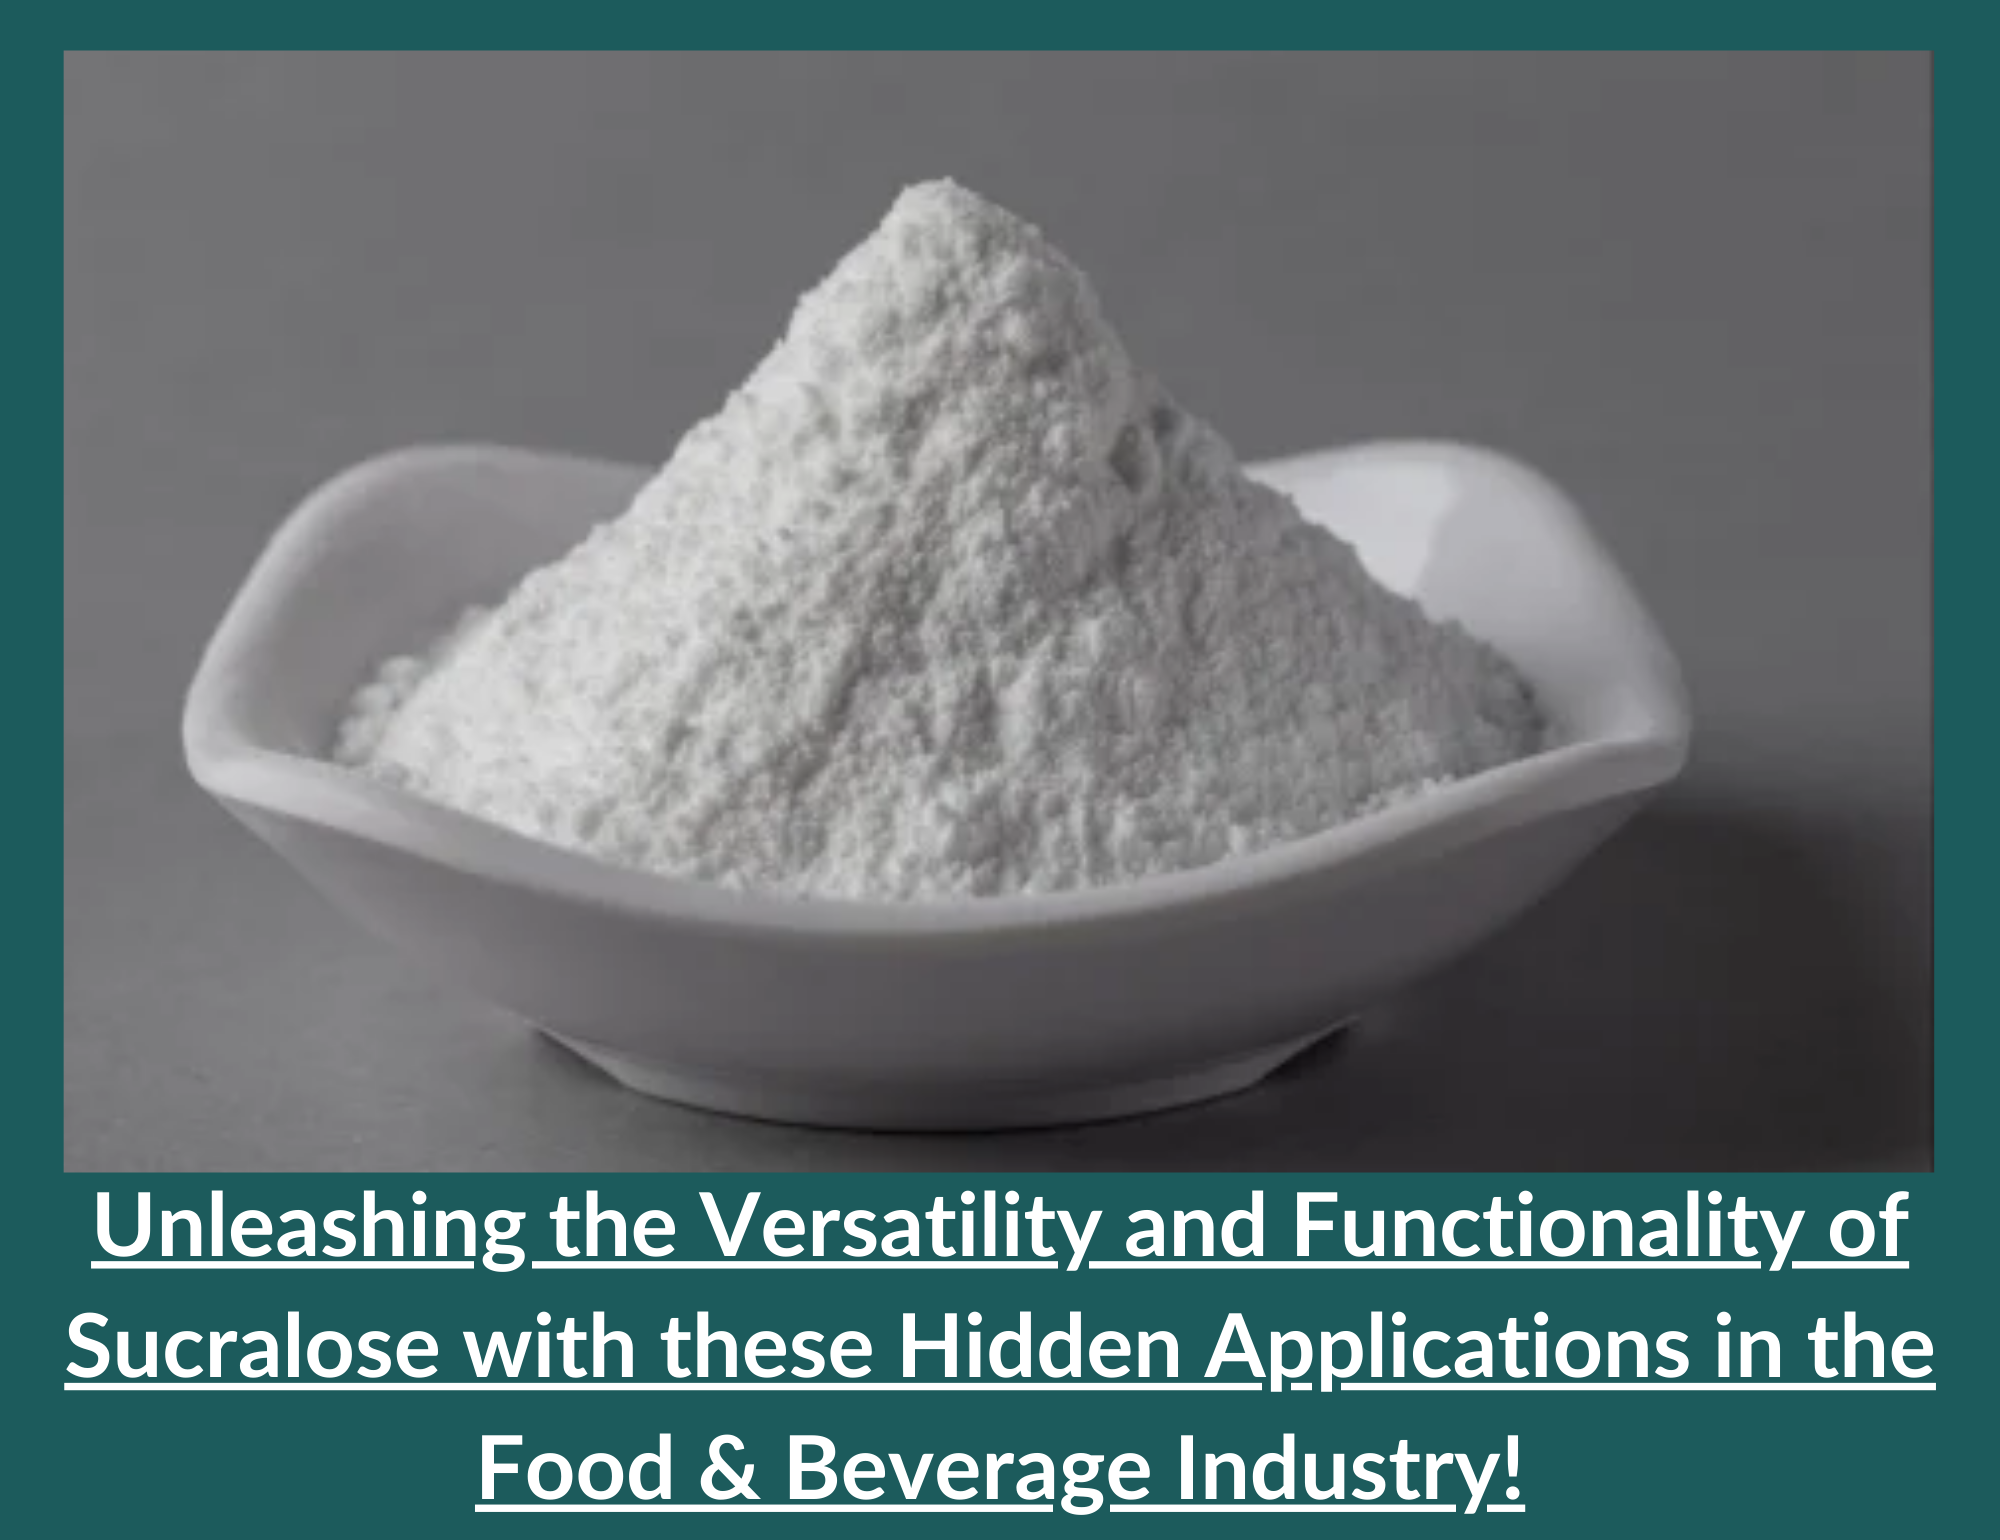 Sucralose applications in the Food & Beverage Industry